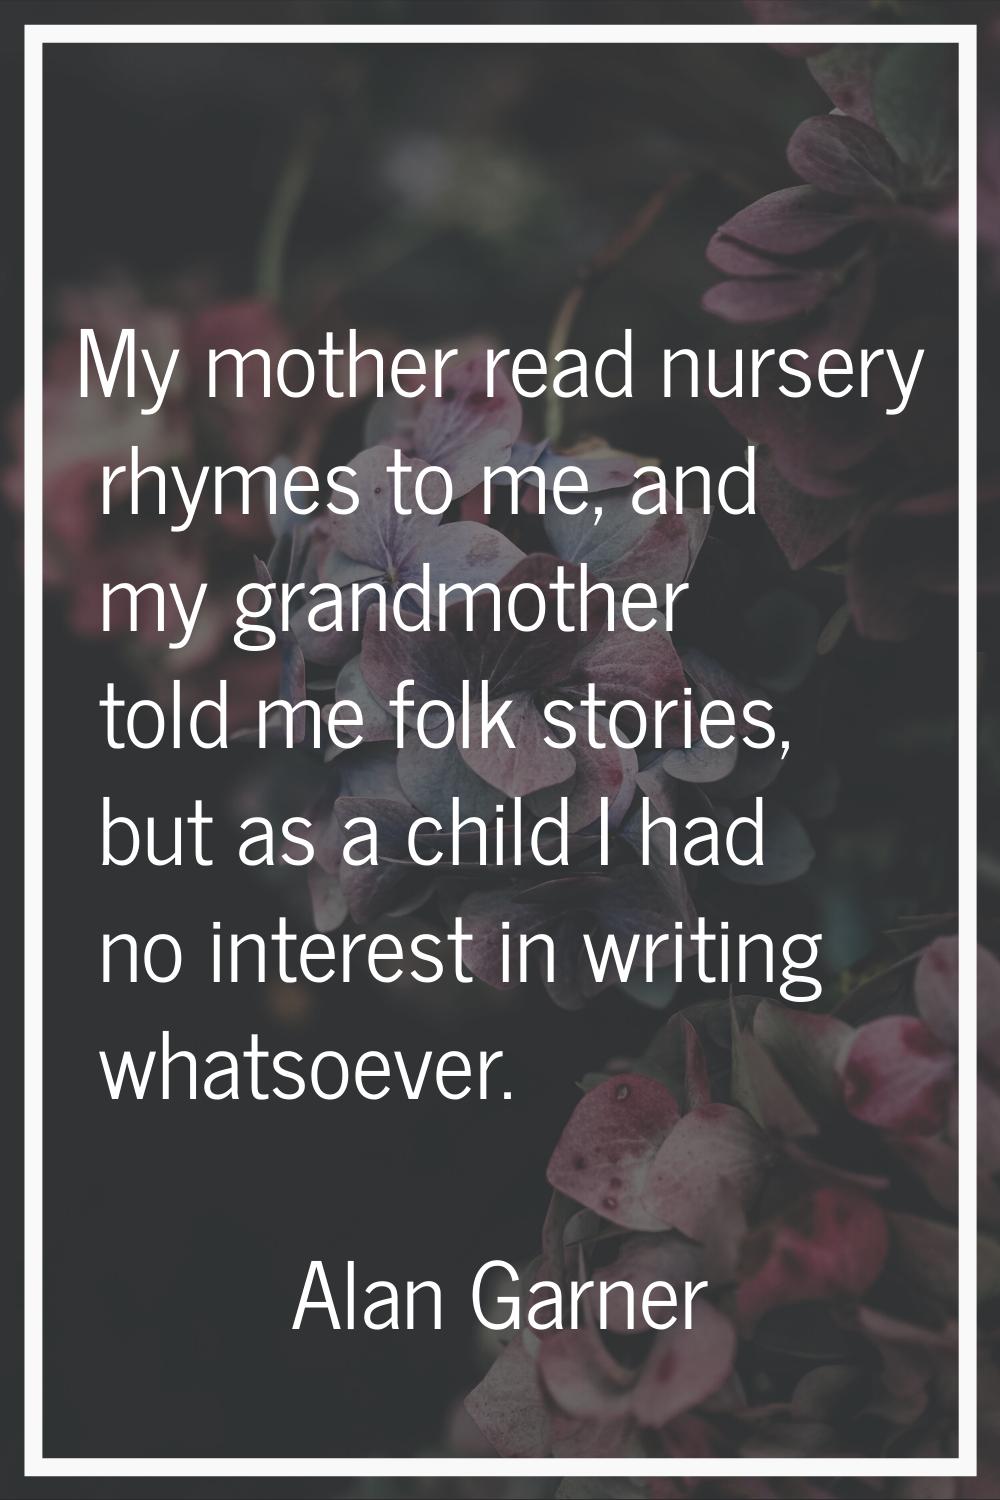 My mother read nursery rhymes to me, and my grandmother told me folk stories, but as a child I had 